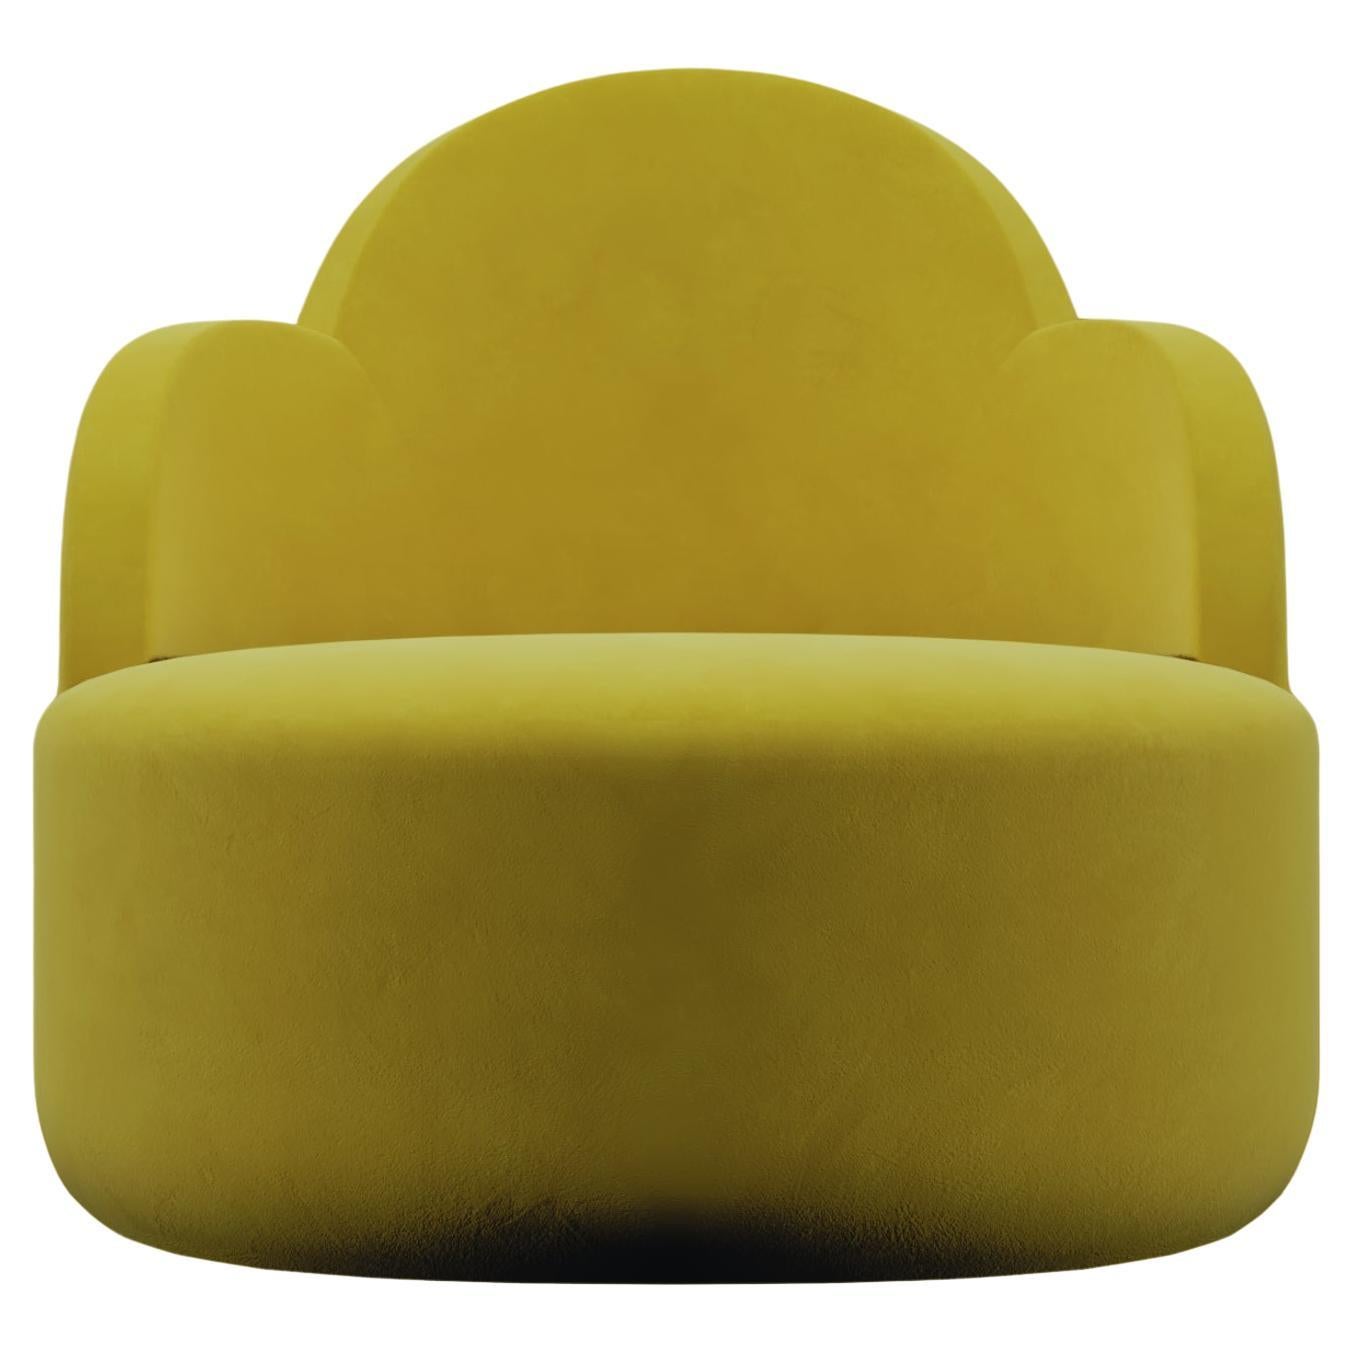 IBIZA Velvet Chair in Yellow by Alexandre Ligios, REP by Tuleste Factory